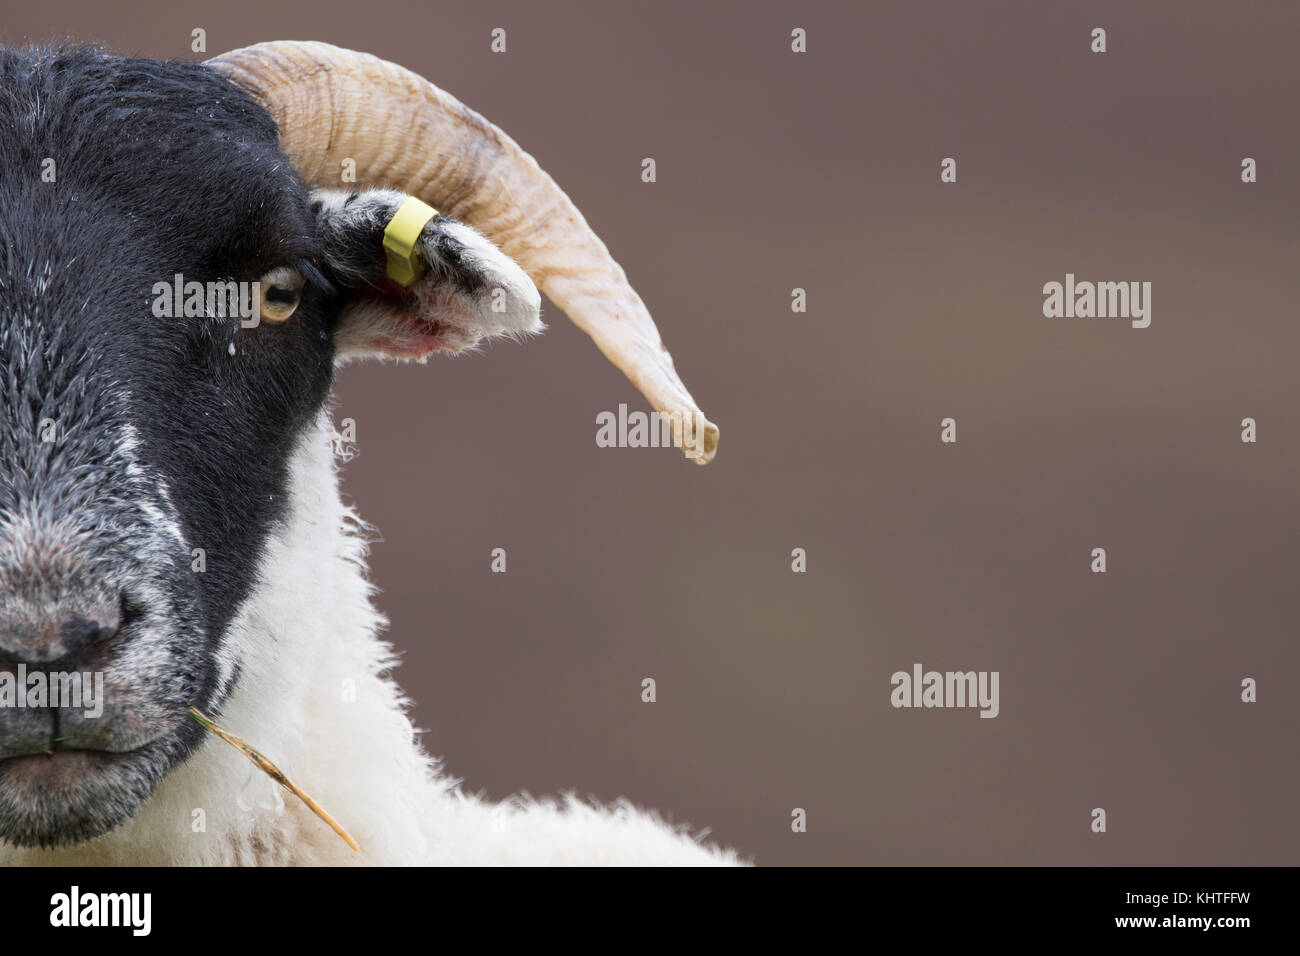 scottish blackfaced sheep, Ovis aries, domestic, close up portrait of individual and group in the mountains with blurred background Stock Photo